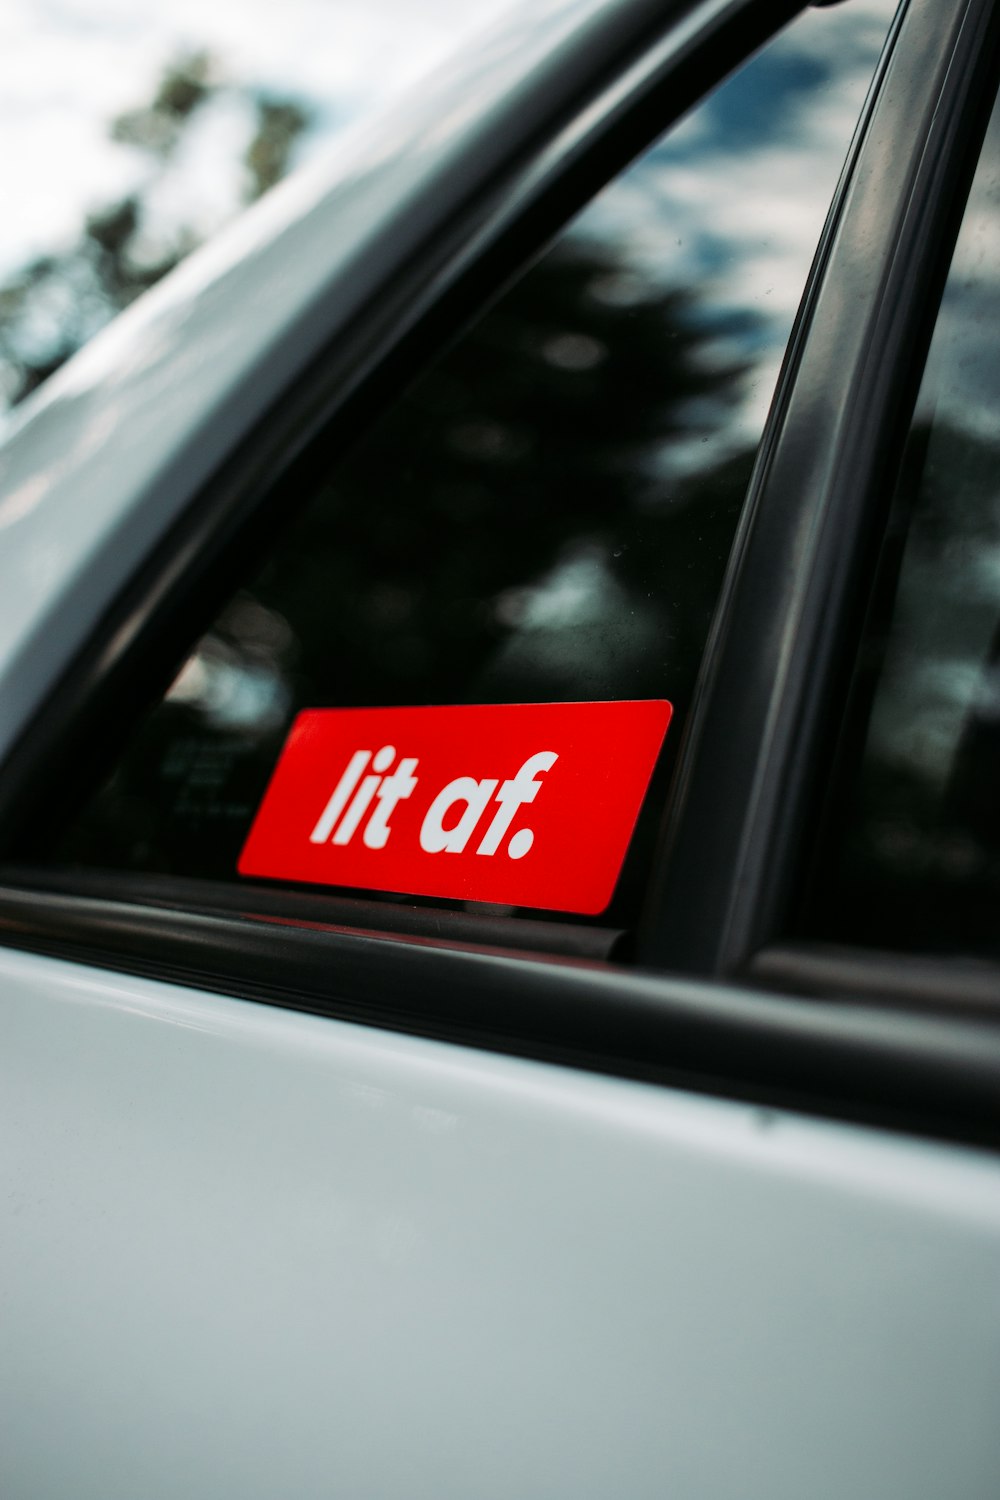 a red sticker that says it's off on the side of a car